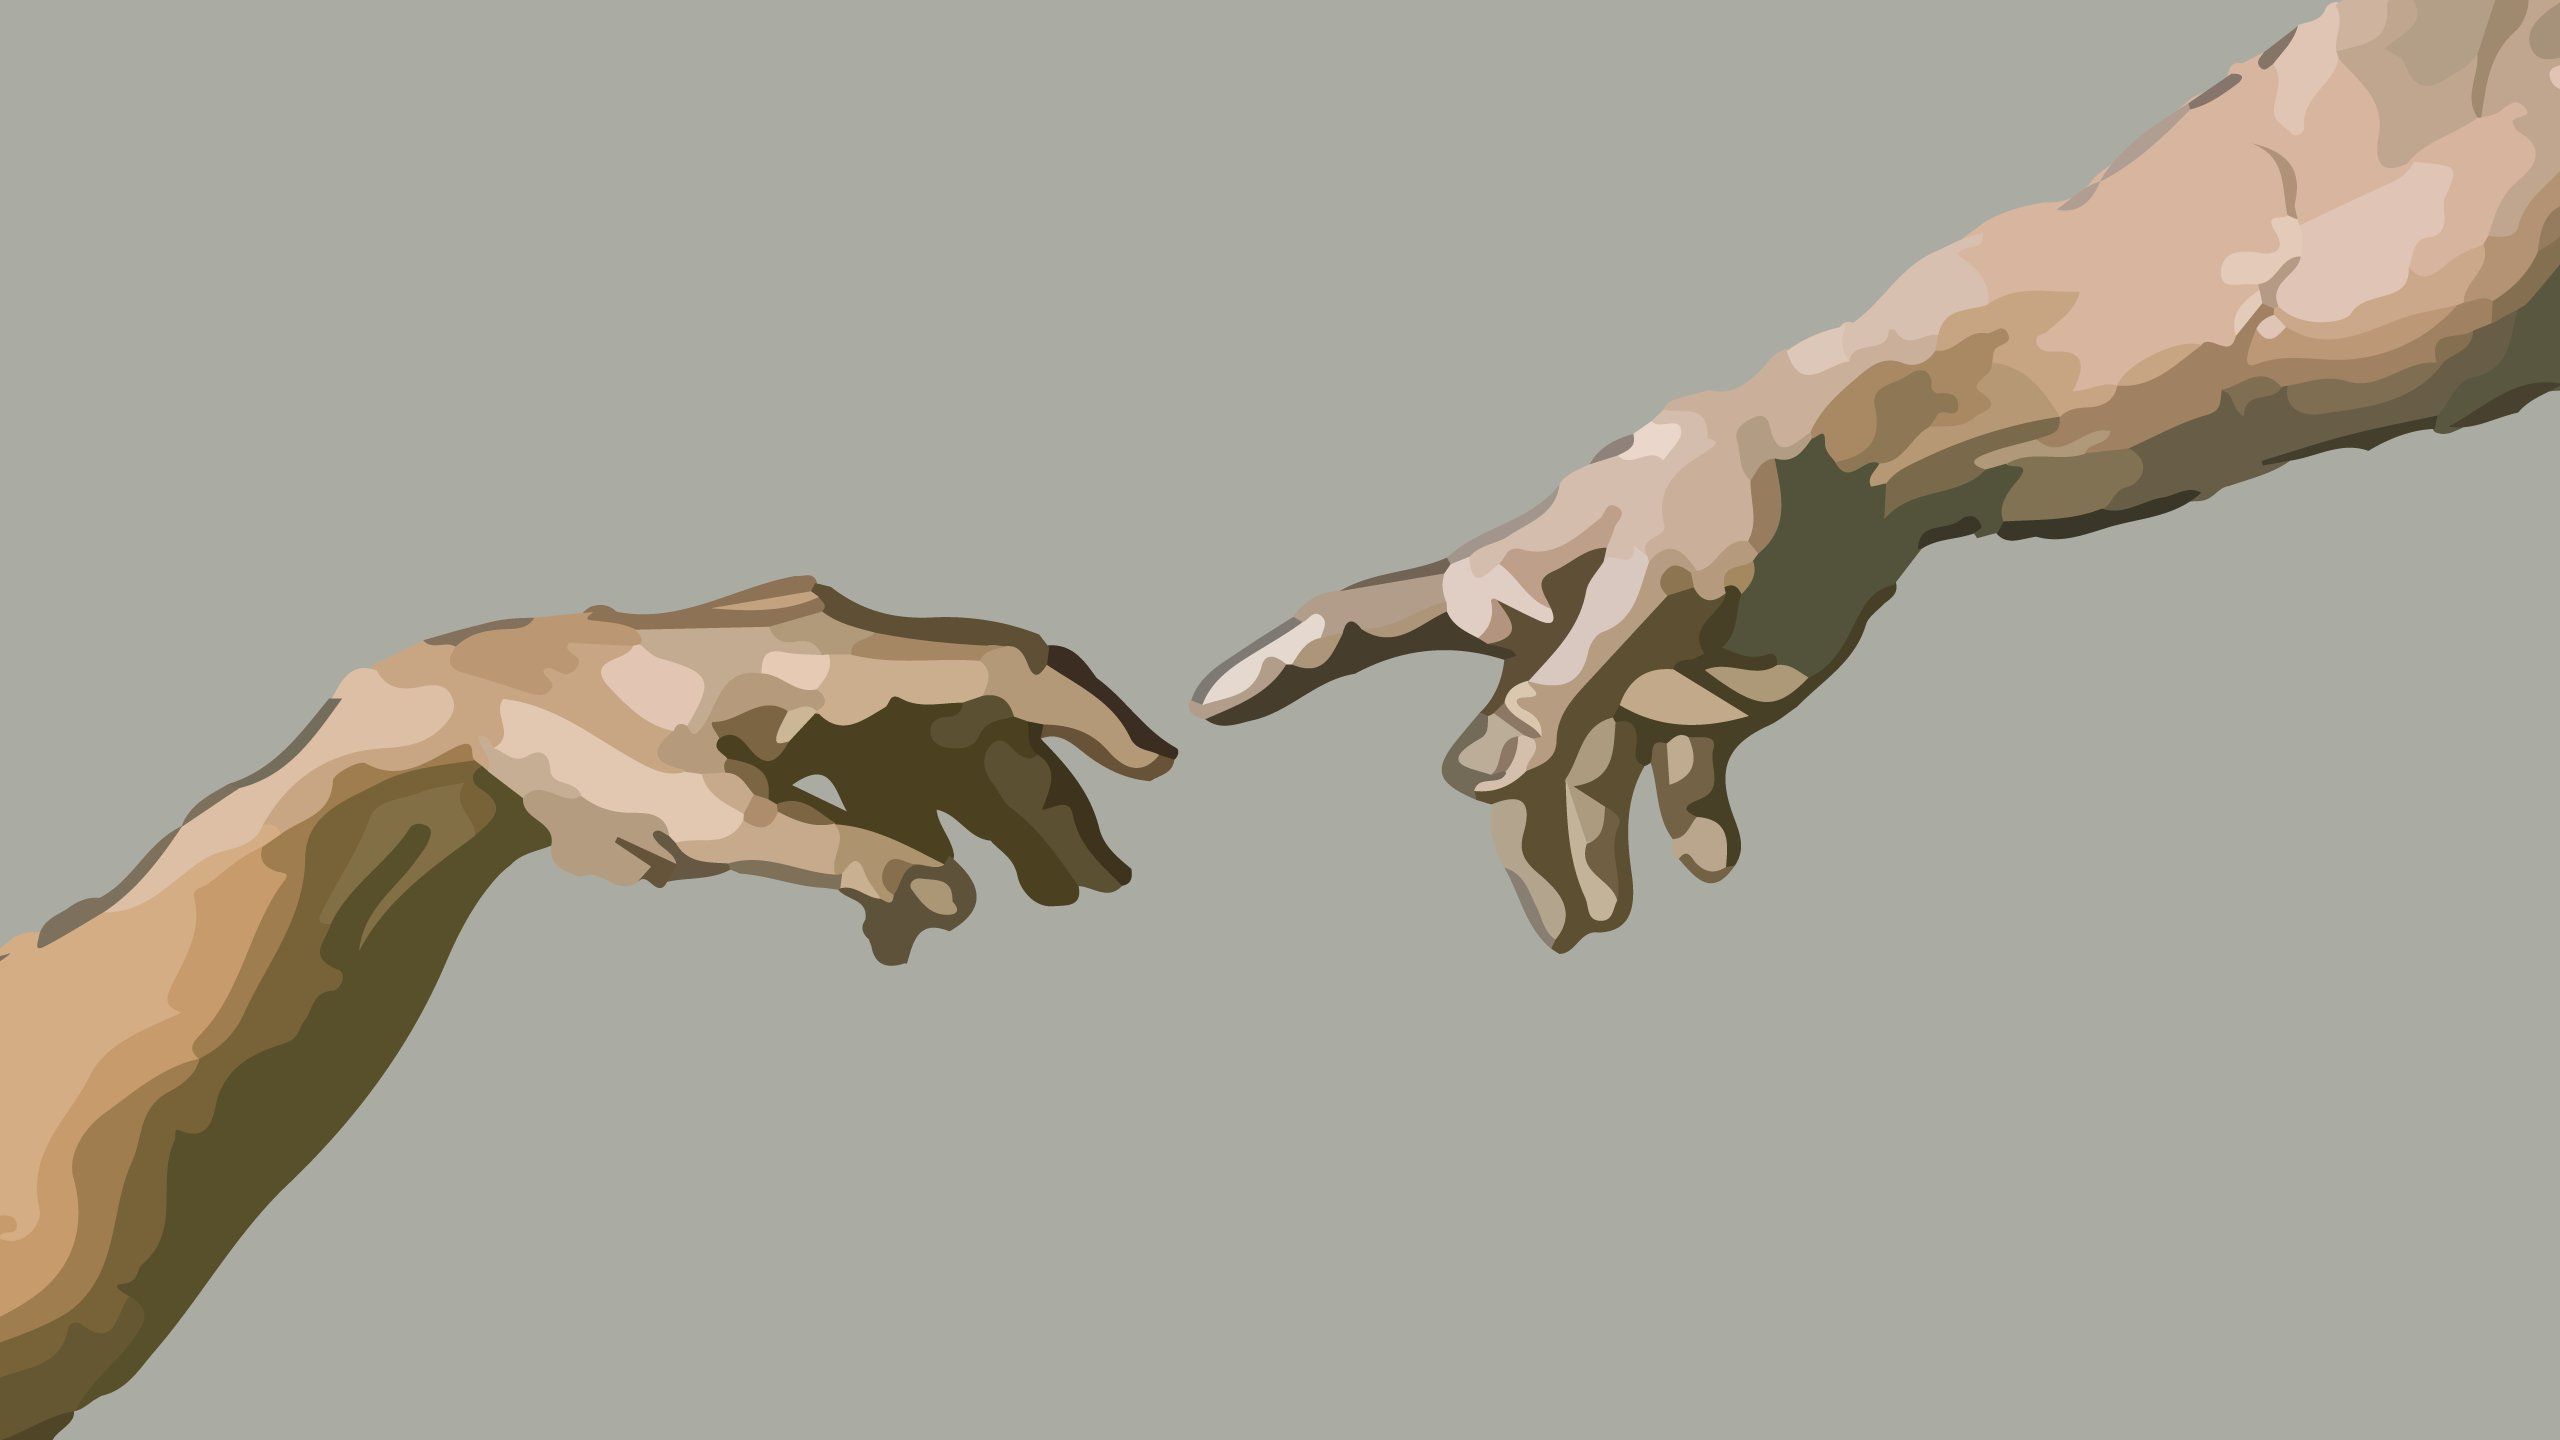 A hand reaching out to another person - The Creation of Adam